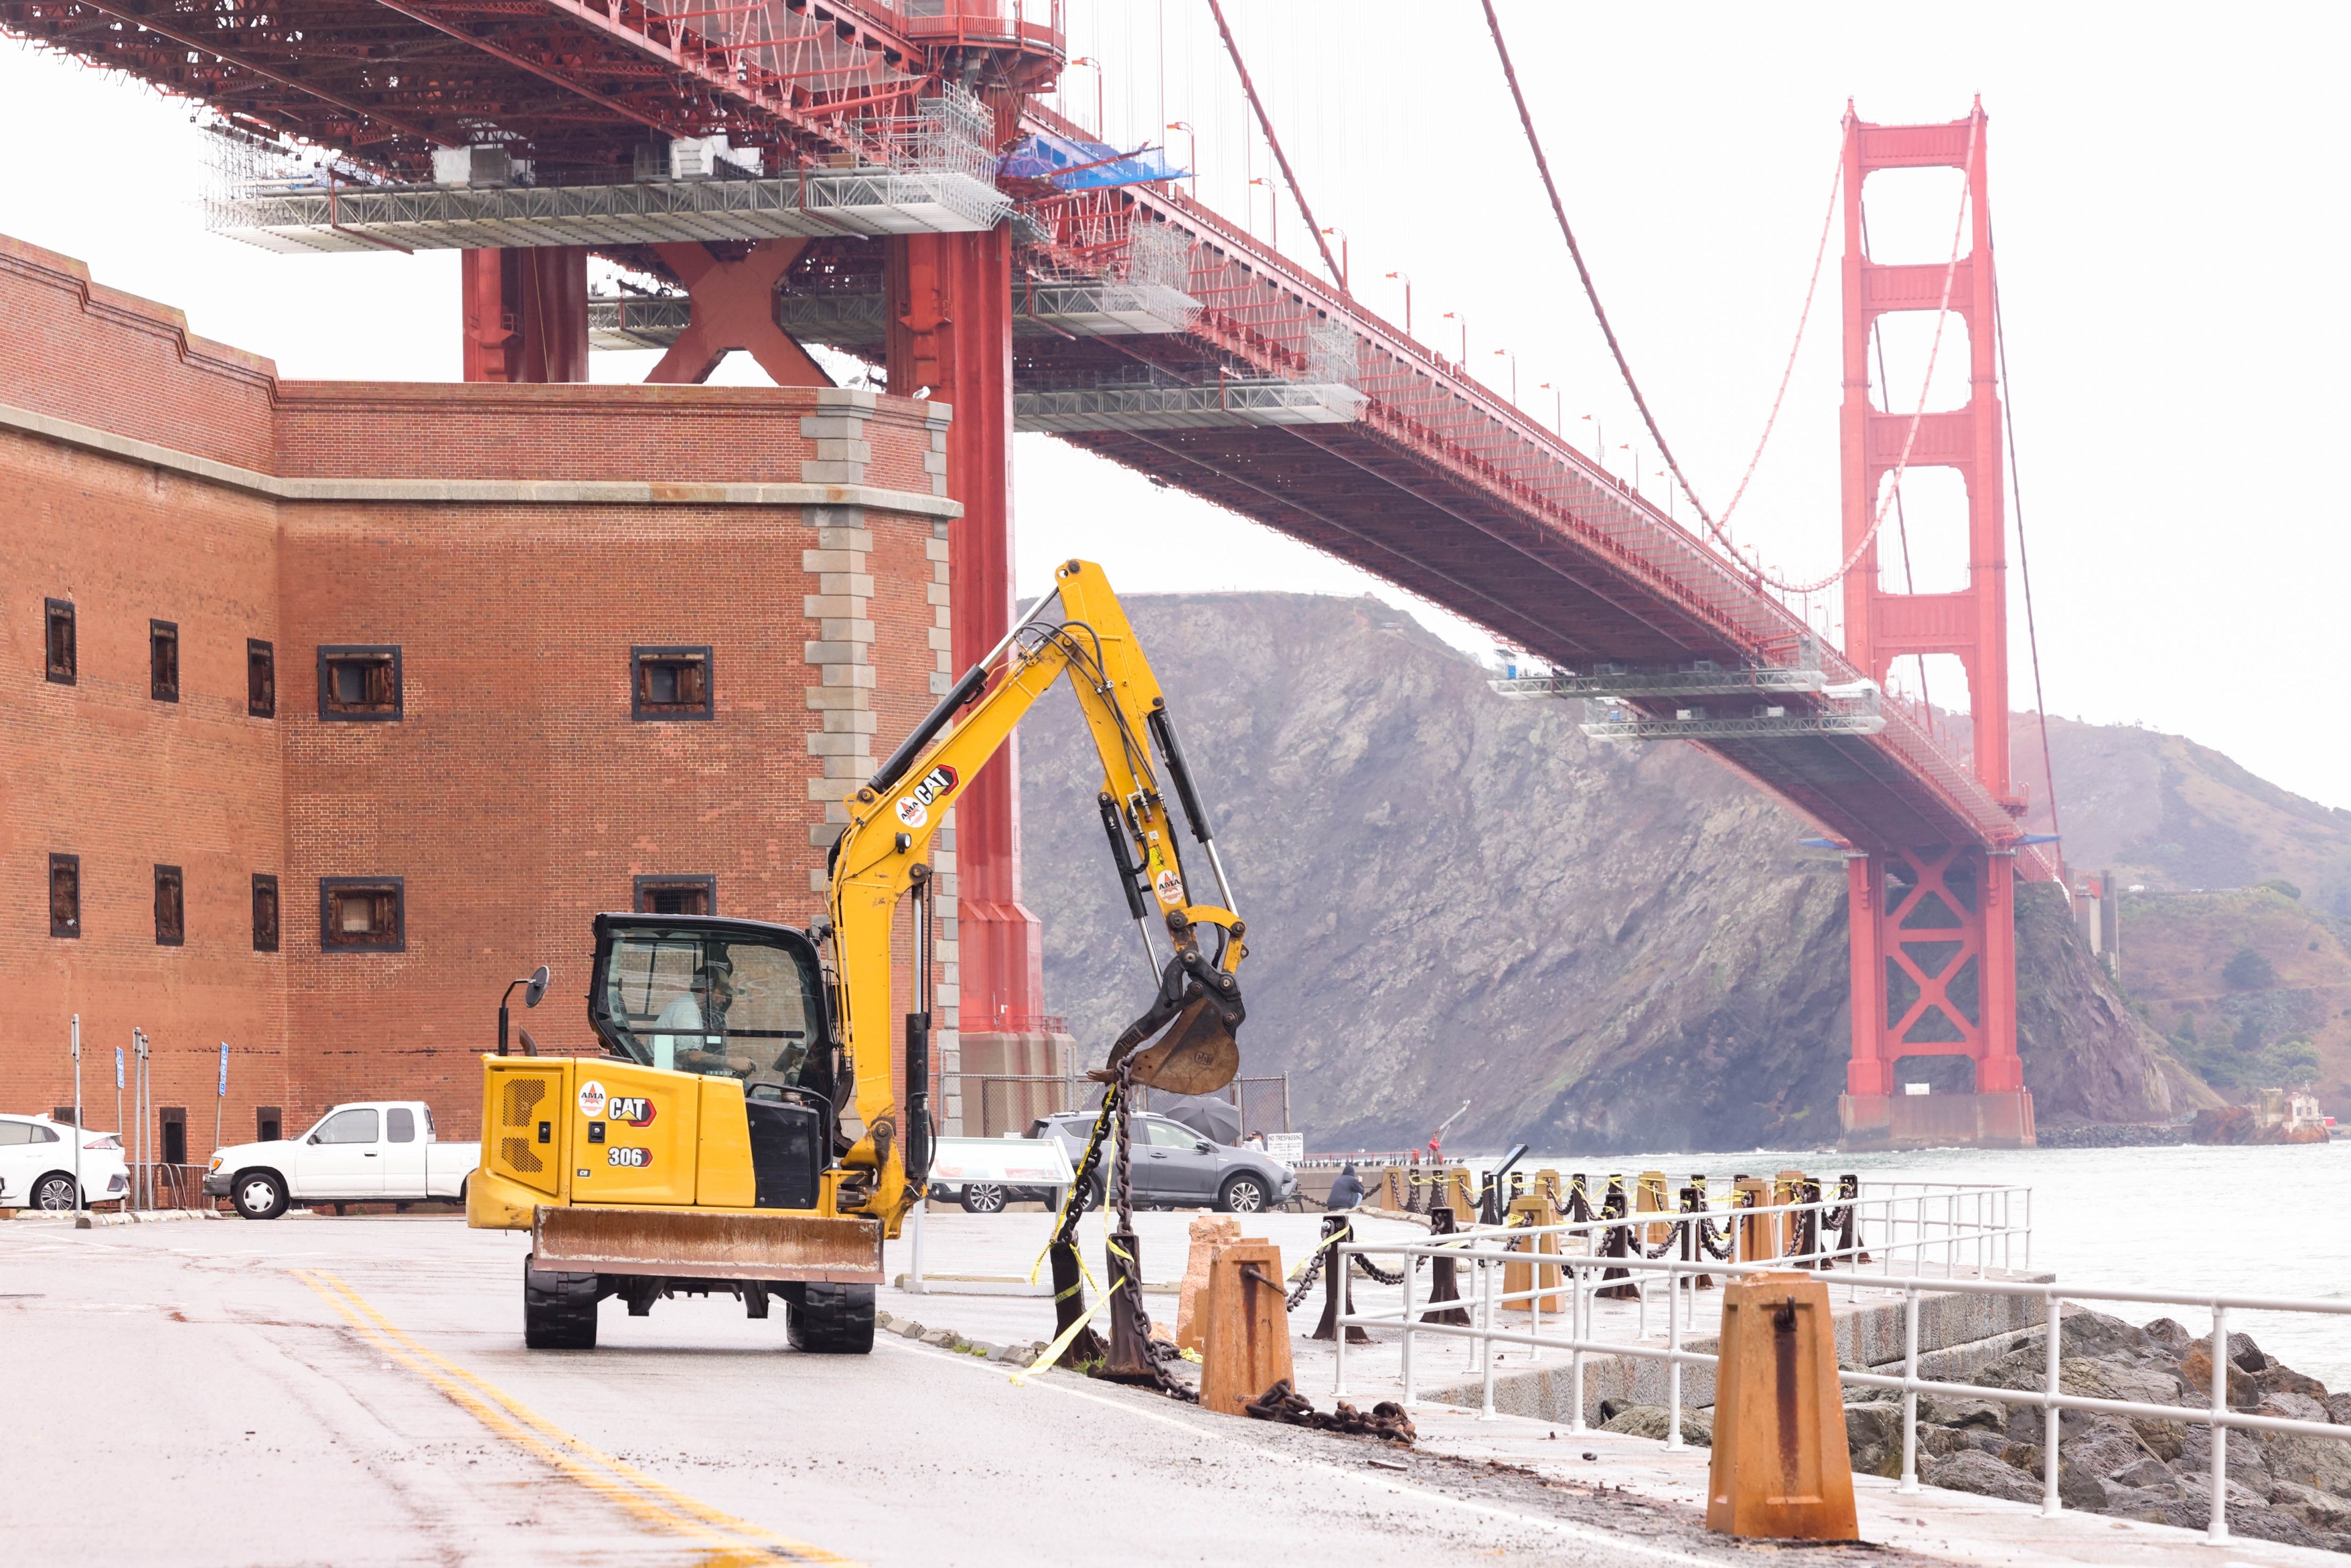 An excavator demolishes metal chains that act as guard rails at Fort Point near the Golden Gate Bridge.